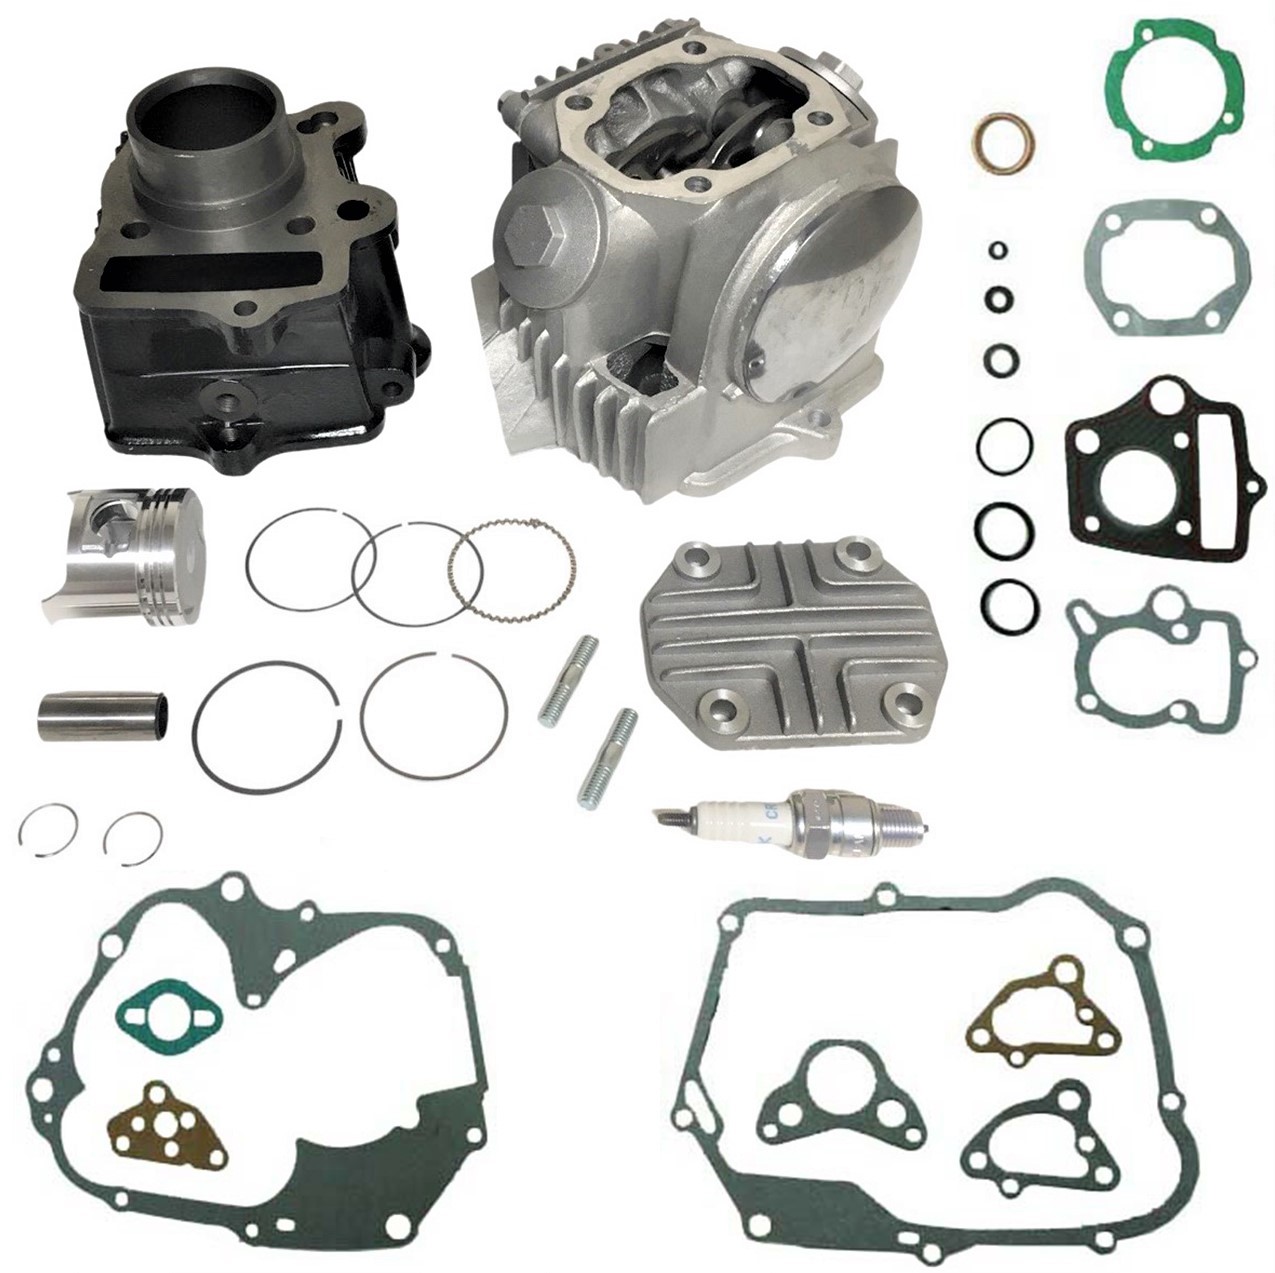 Cylinder & Head kit 50cc Chinese ATVs and Dirtbikes - Click Image to Close